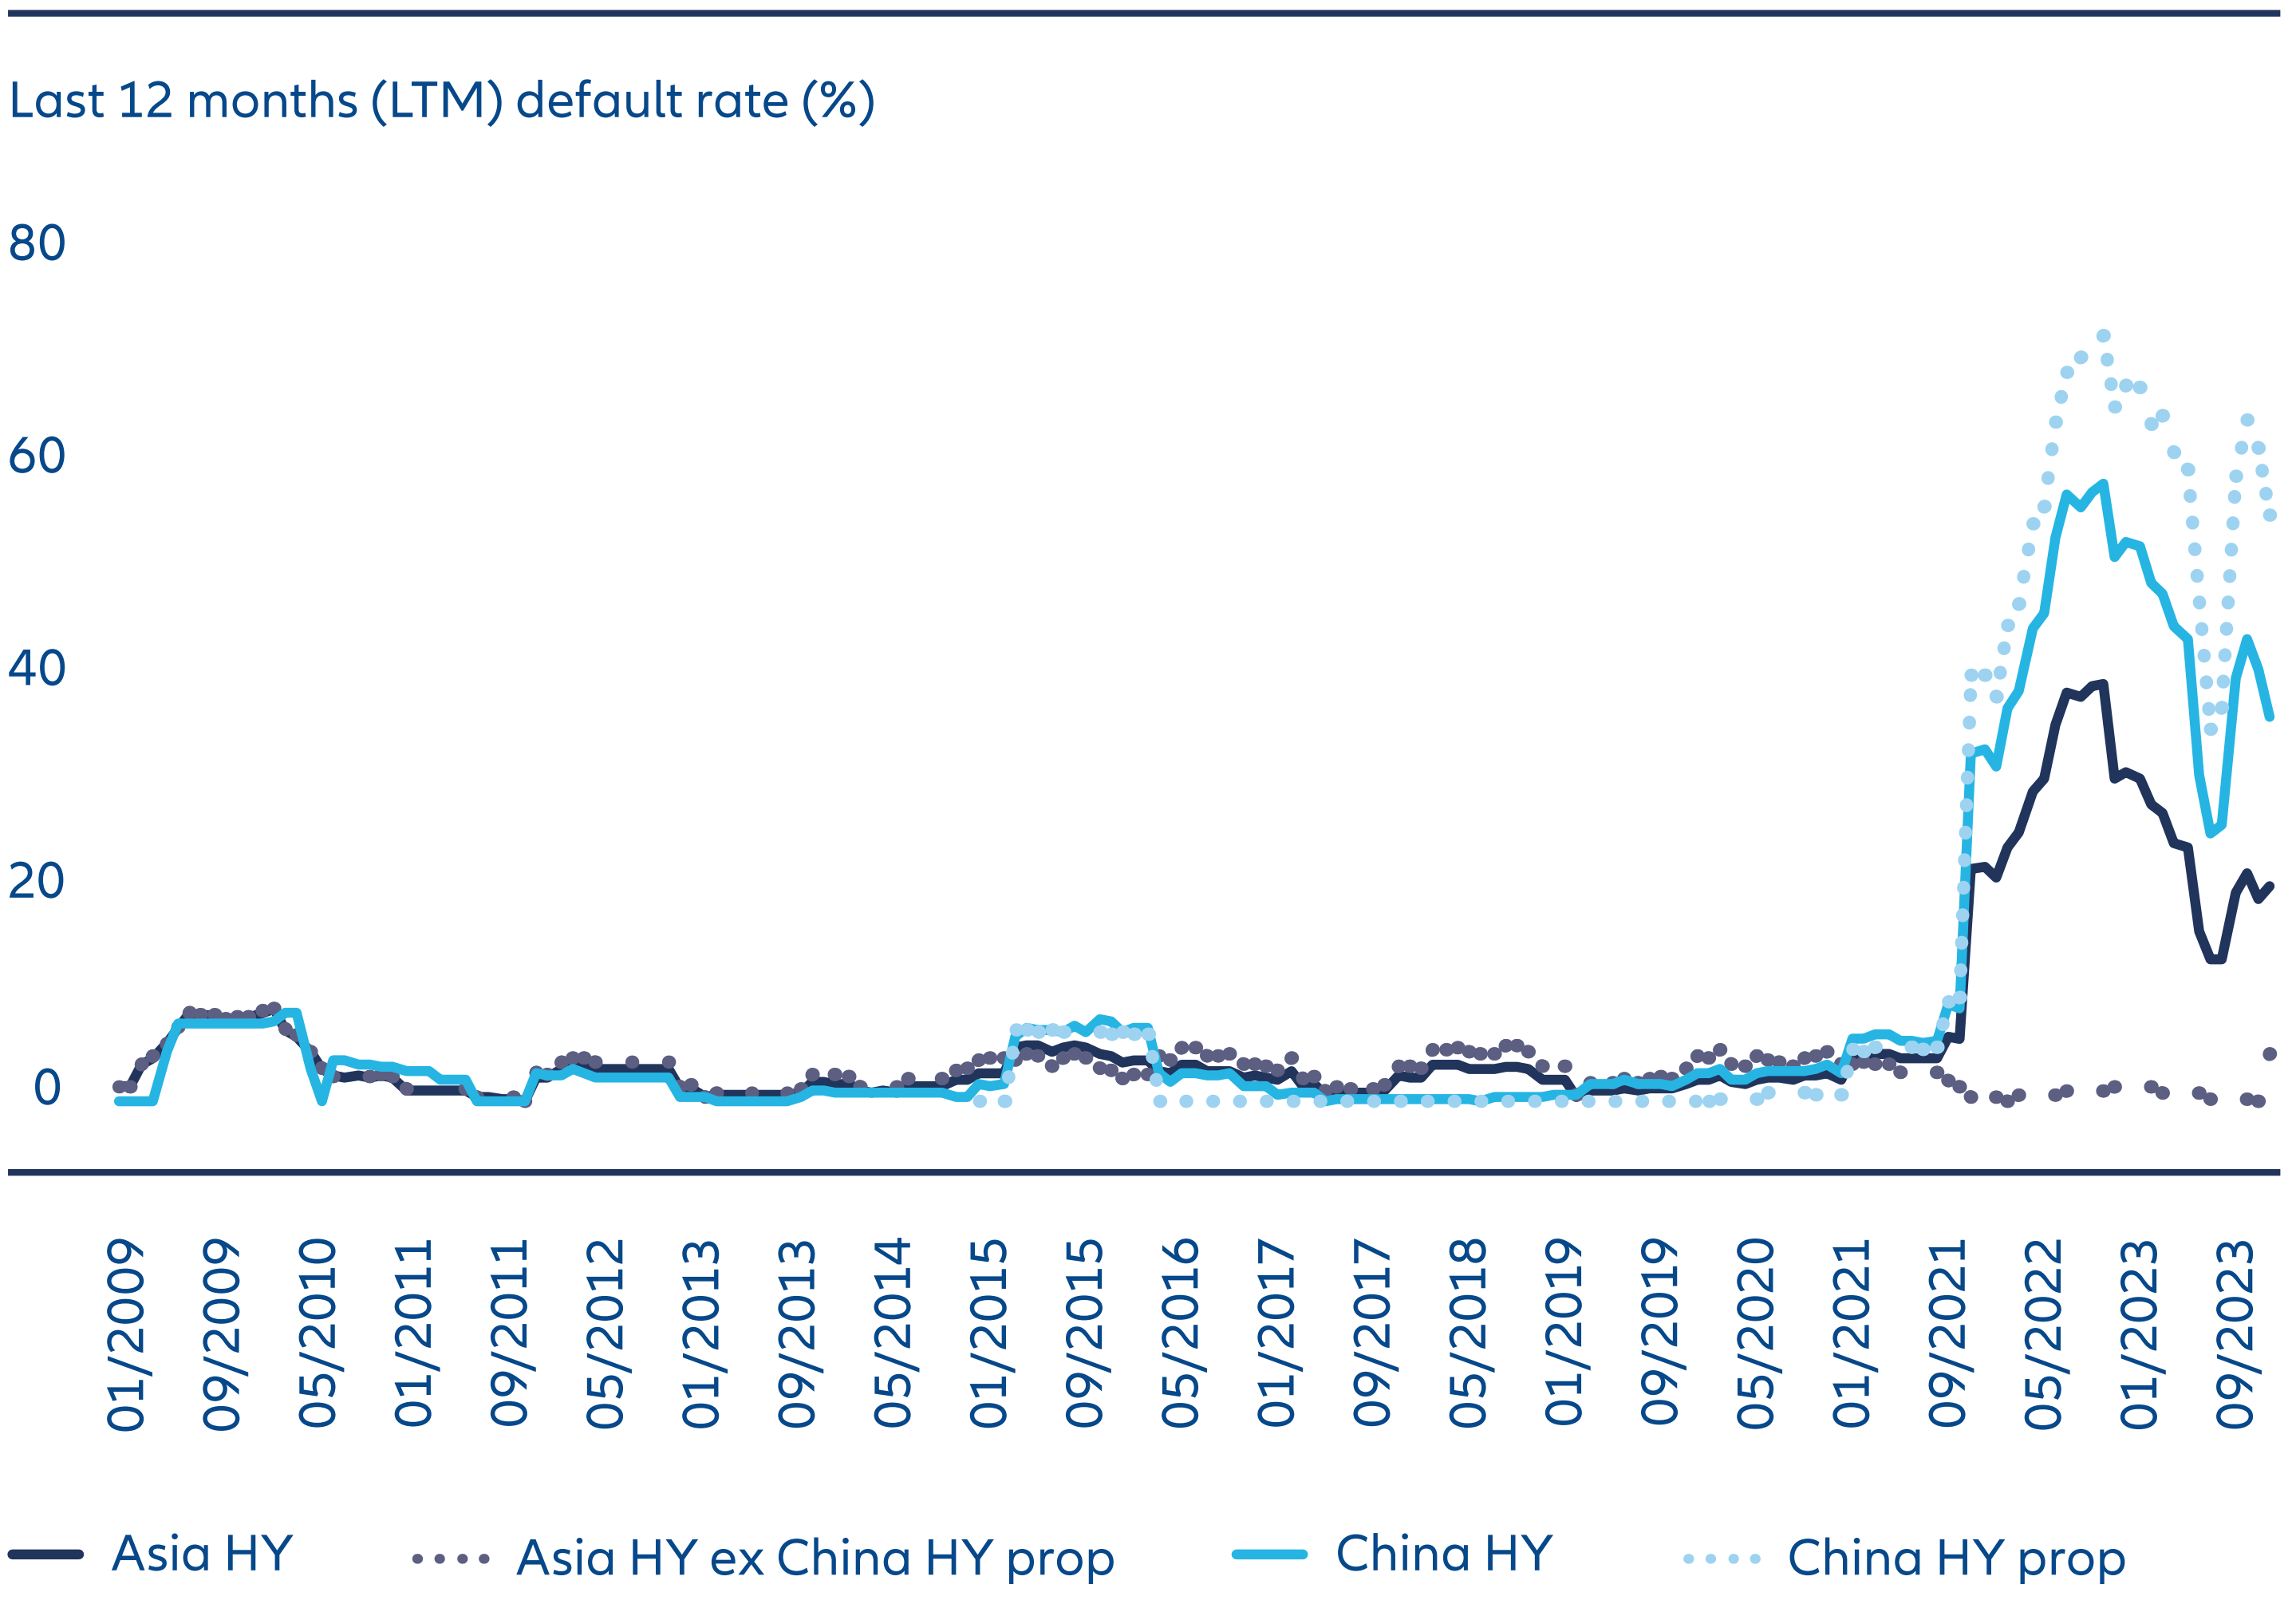 Exhibit 3: End of China default cycle positive for Asia high yield